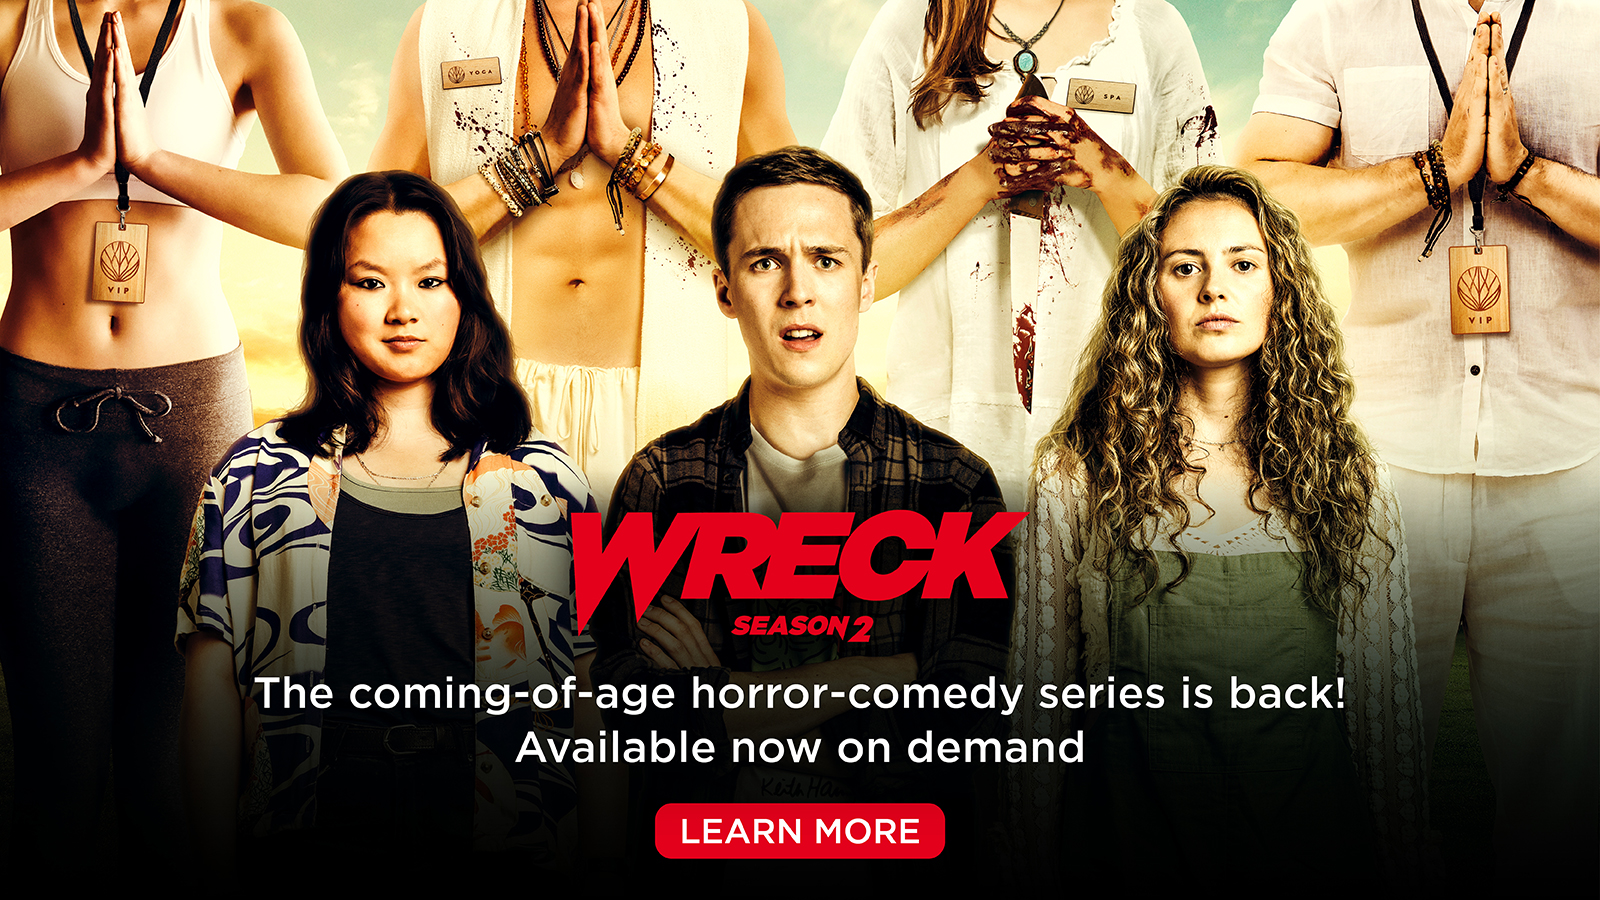 Wreck Season 2 The coming-of-age horror-comedy series is back! Available now on demand [Learn More]